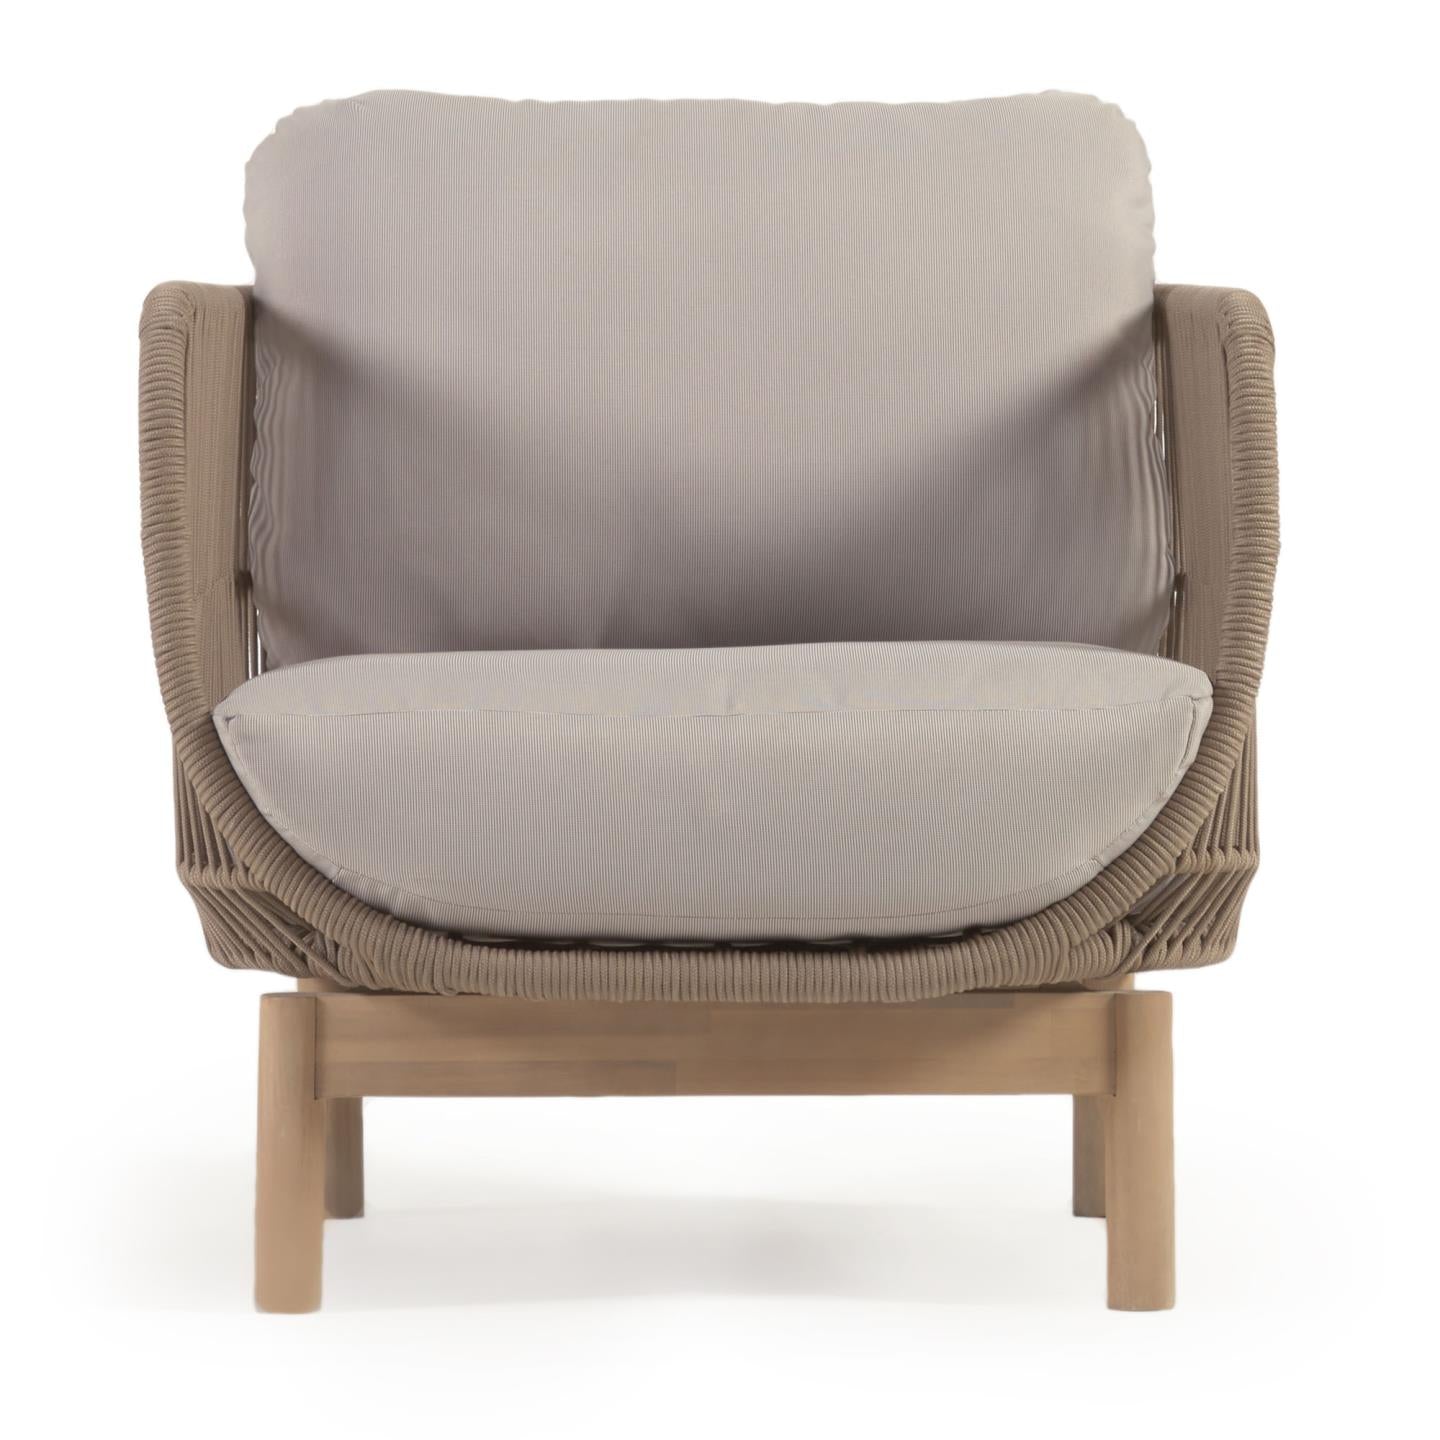 Catalina armchair made with beige rope and FSC solid acacia wood